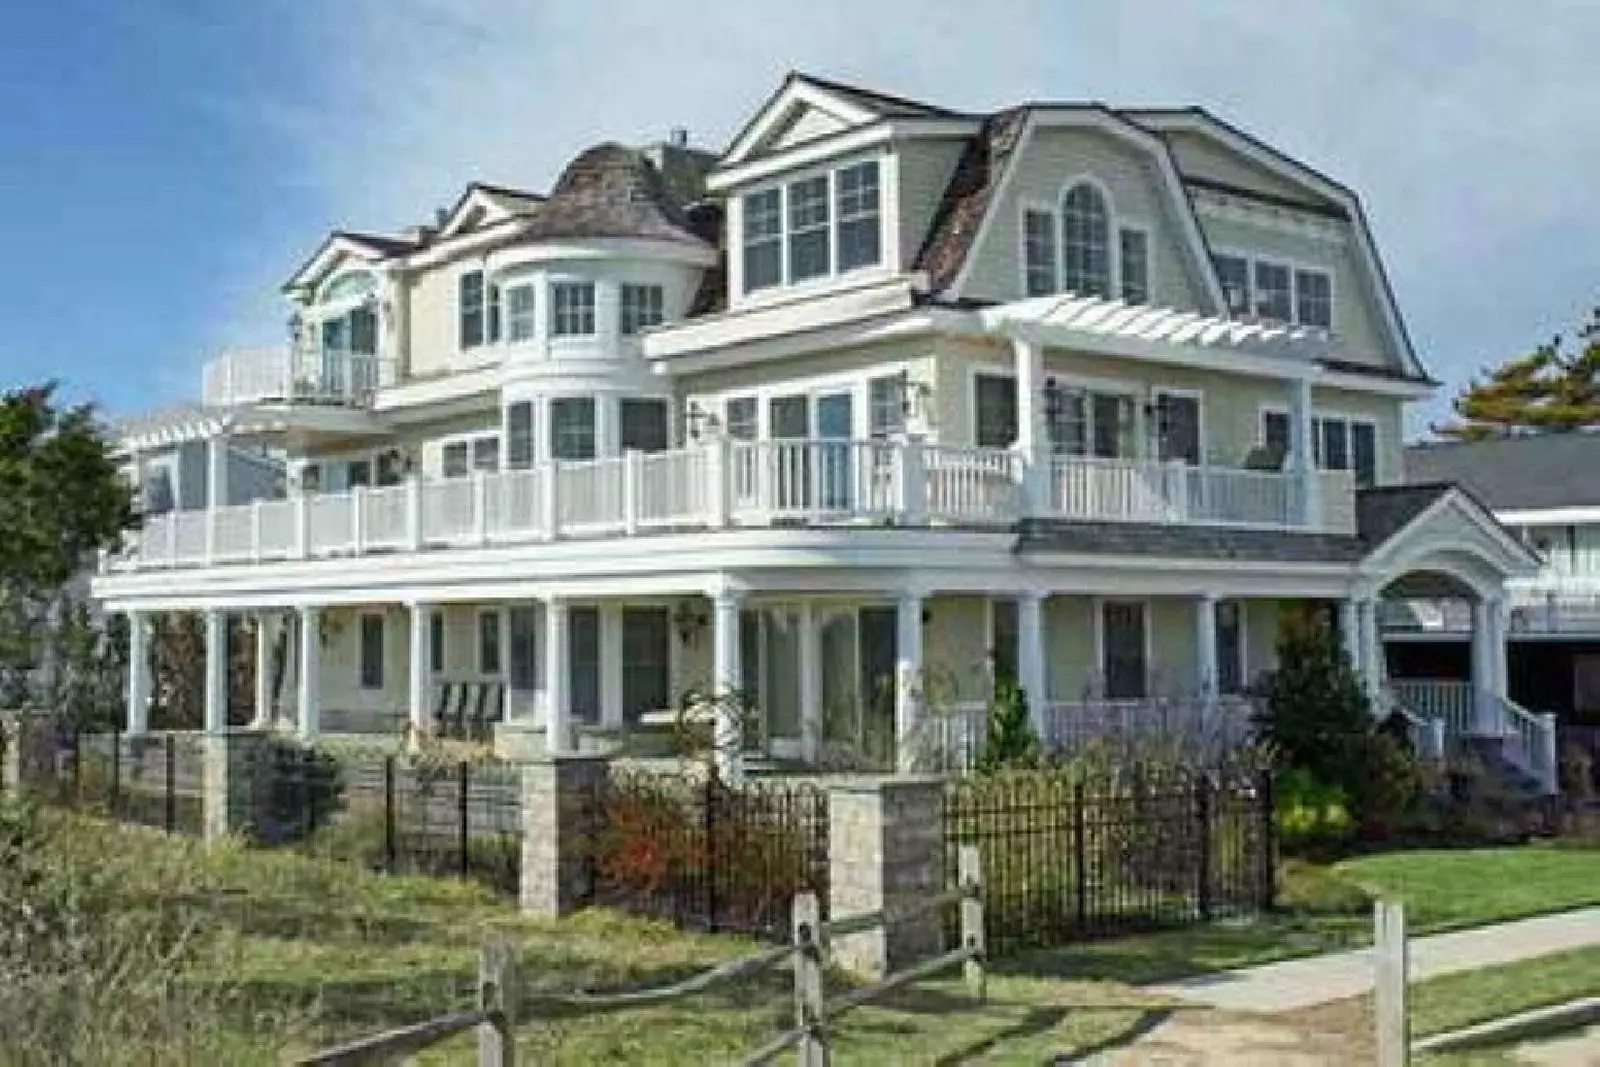 Beautiful Avalon, NJ mansion is stunning inside and out